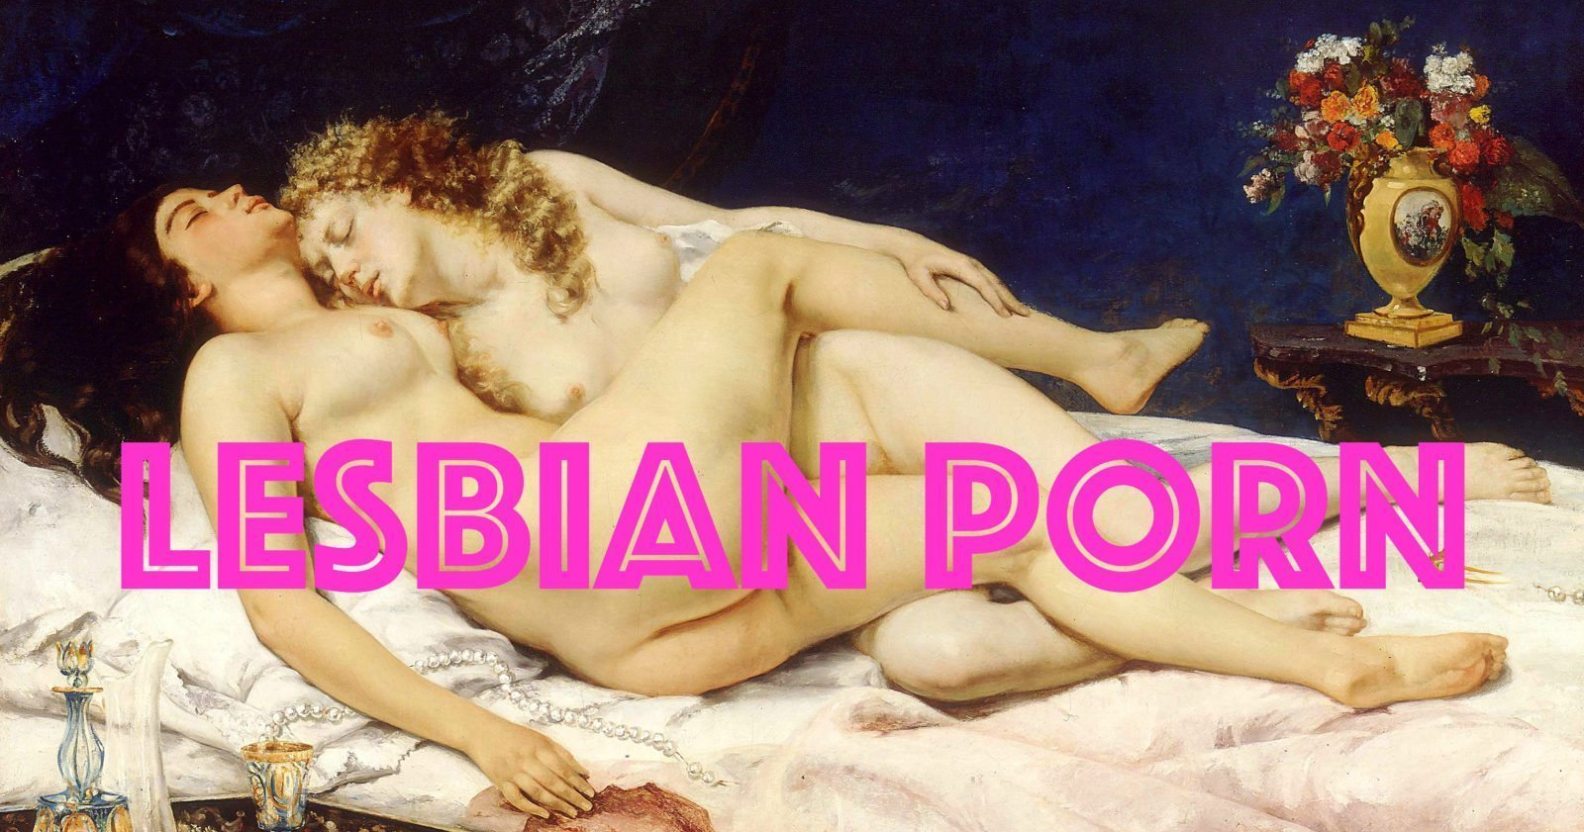 Here's all the hottest lesbian porn that requires your attention | PinkNews